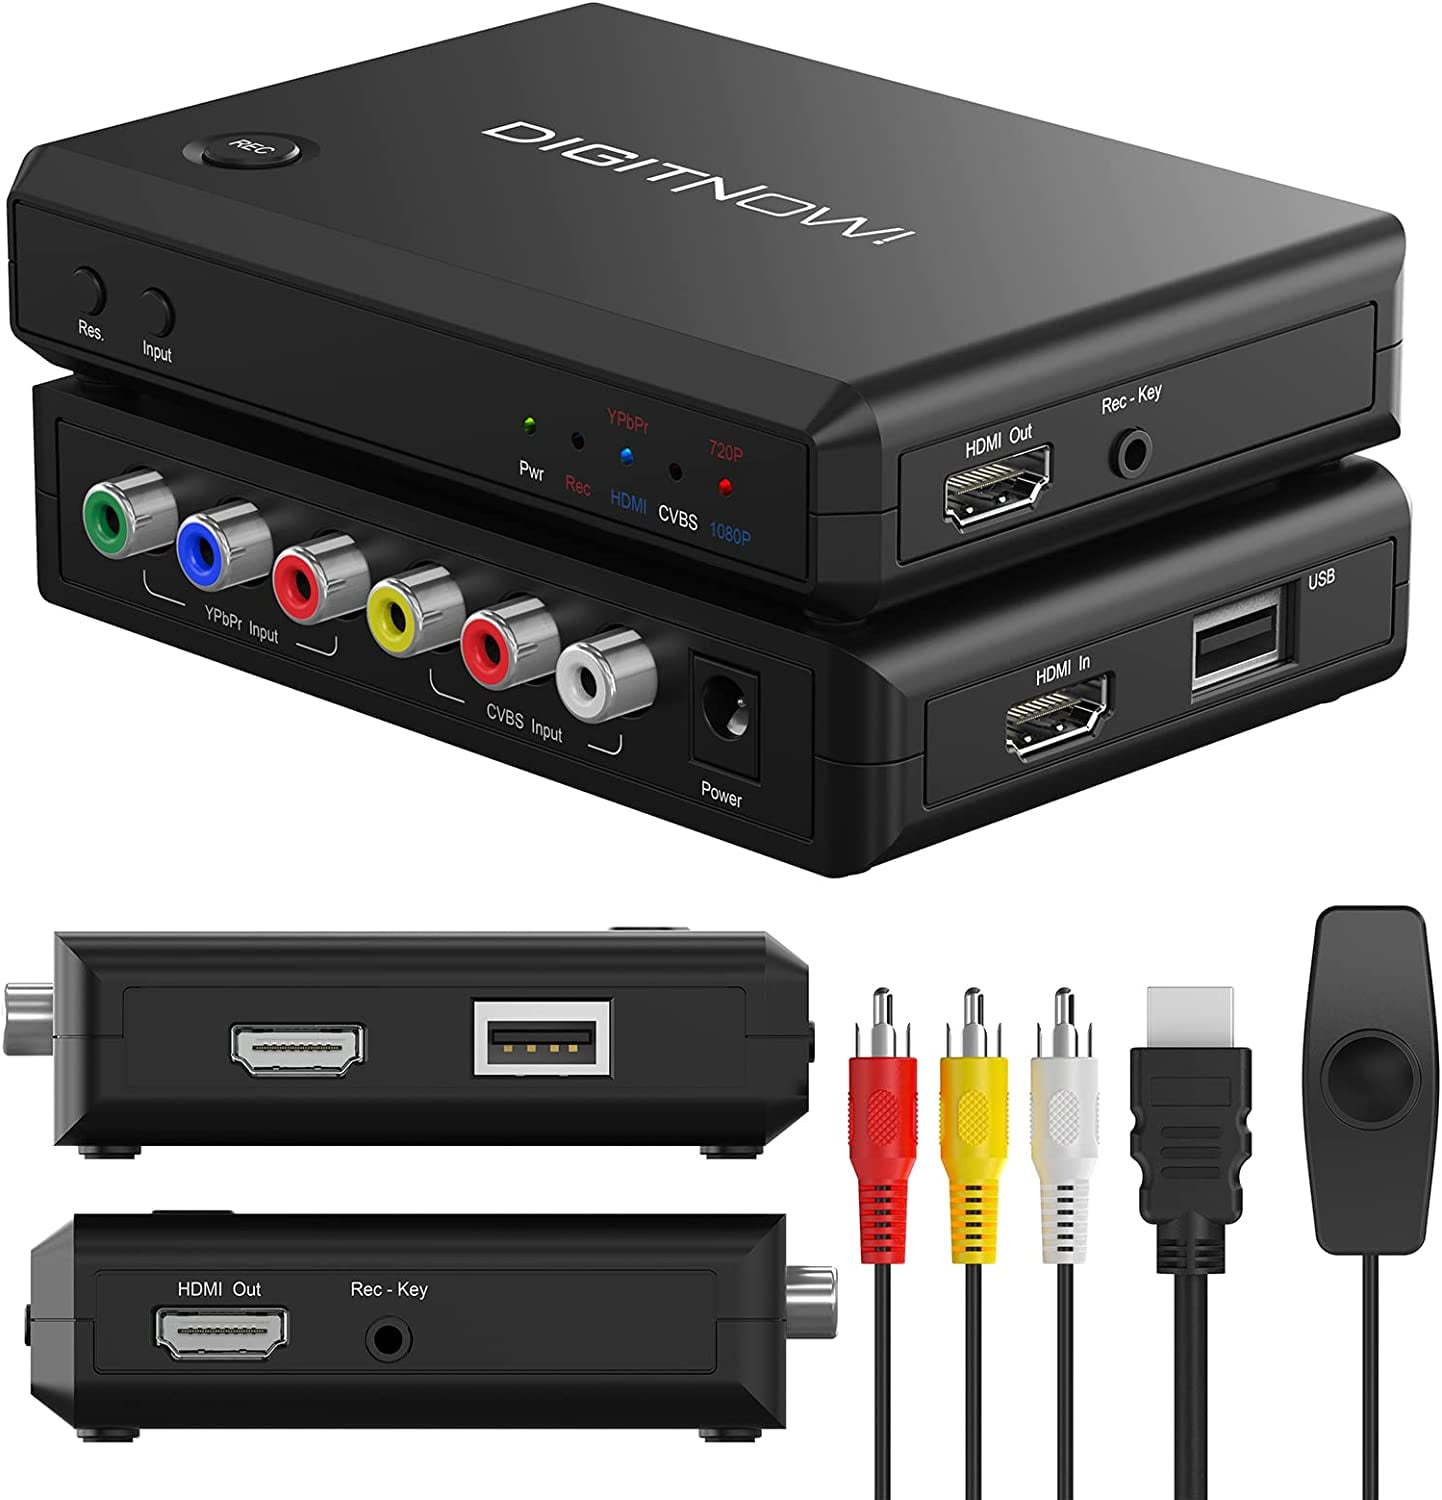 Inspektør Savant international DIGITNOW! HD Game Capture HD Video Capture Device 1080P HDMI Video capture  Converter/Adapter Recorder for PS4, Xbox One/Xbox 360,LiveTV,PVR DVR and  more,Support HDMI/YPbPr/CVBS Input and HDMI Output - Walmart.com